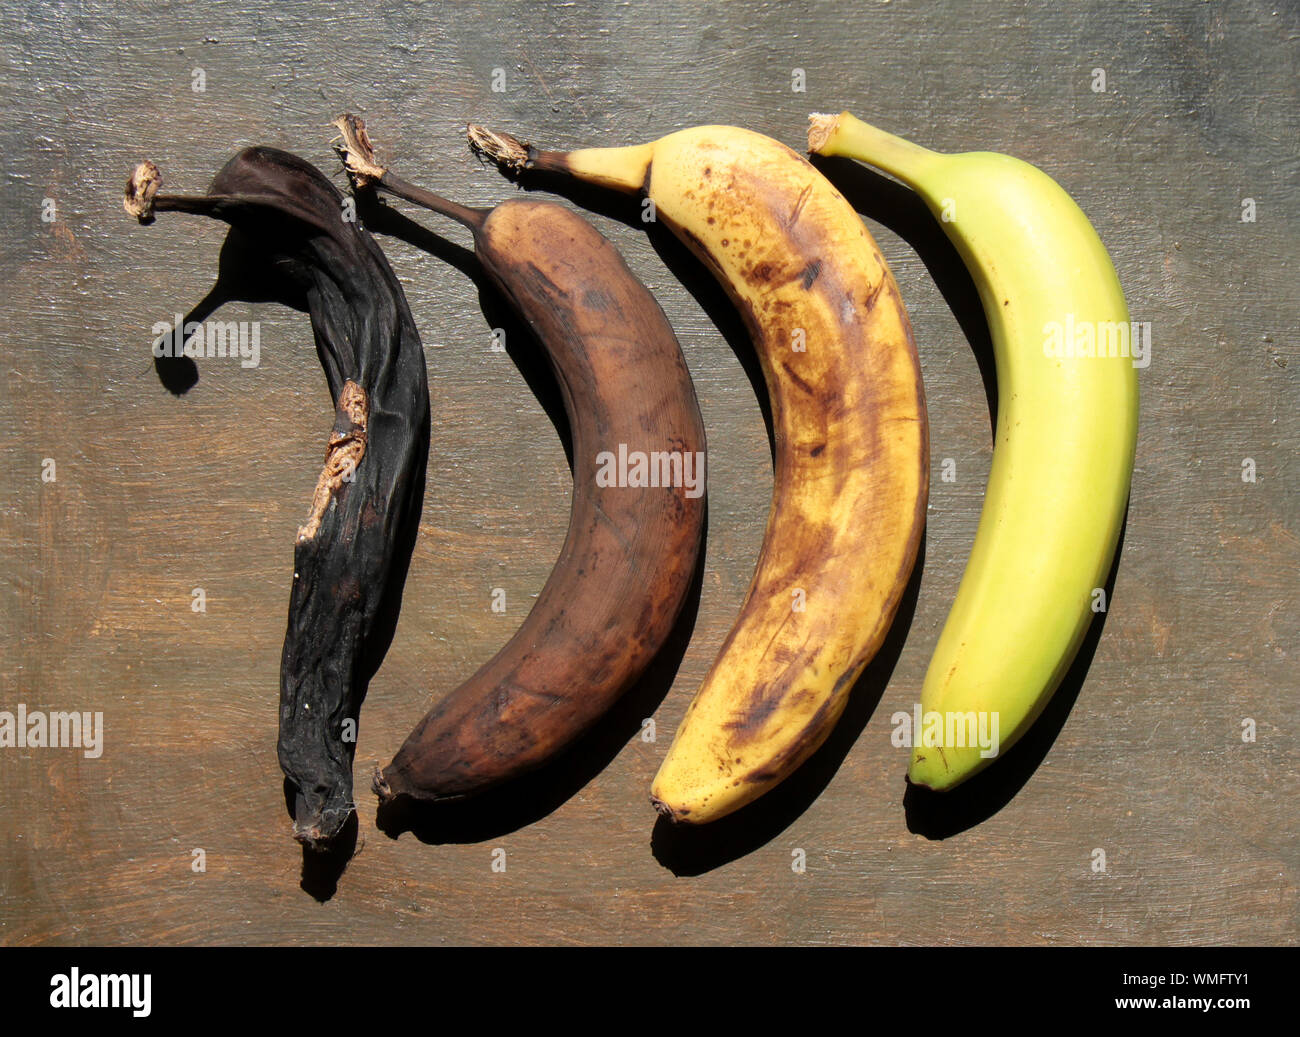 Aging Process Of Banana On Table Stock Photo